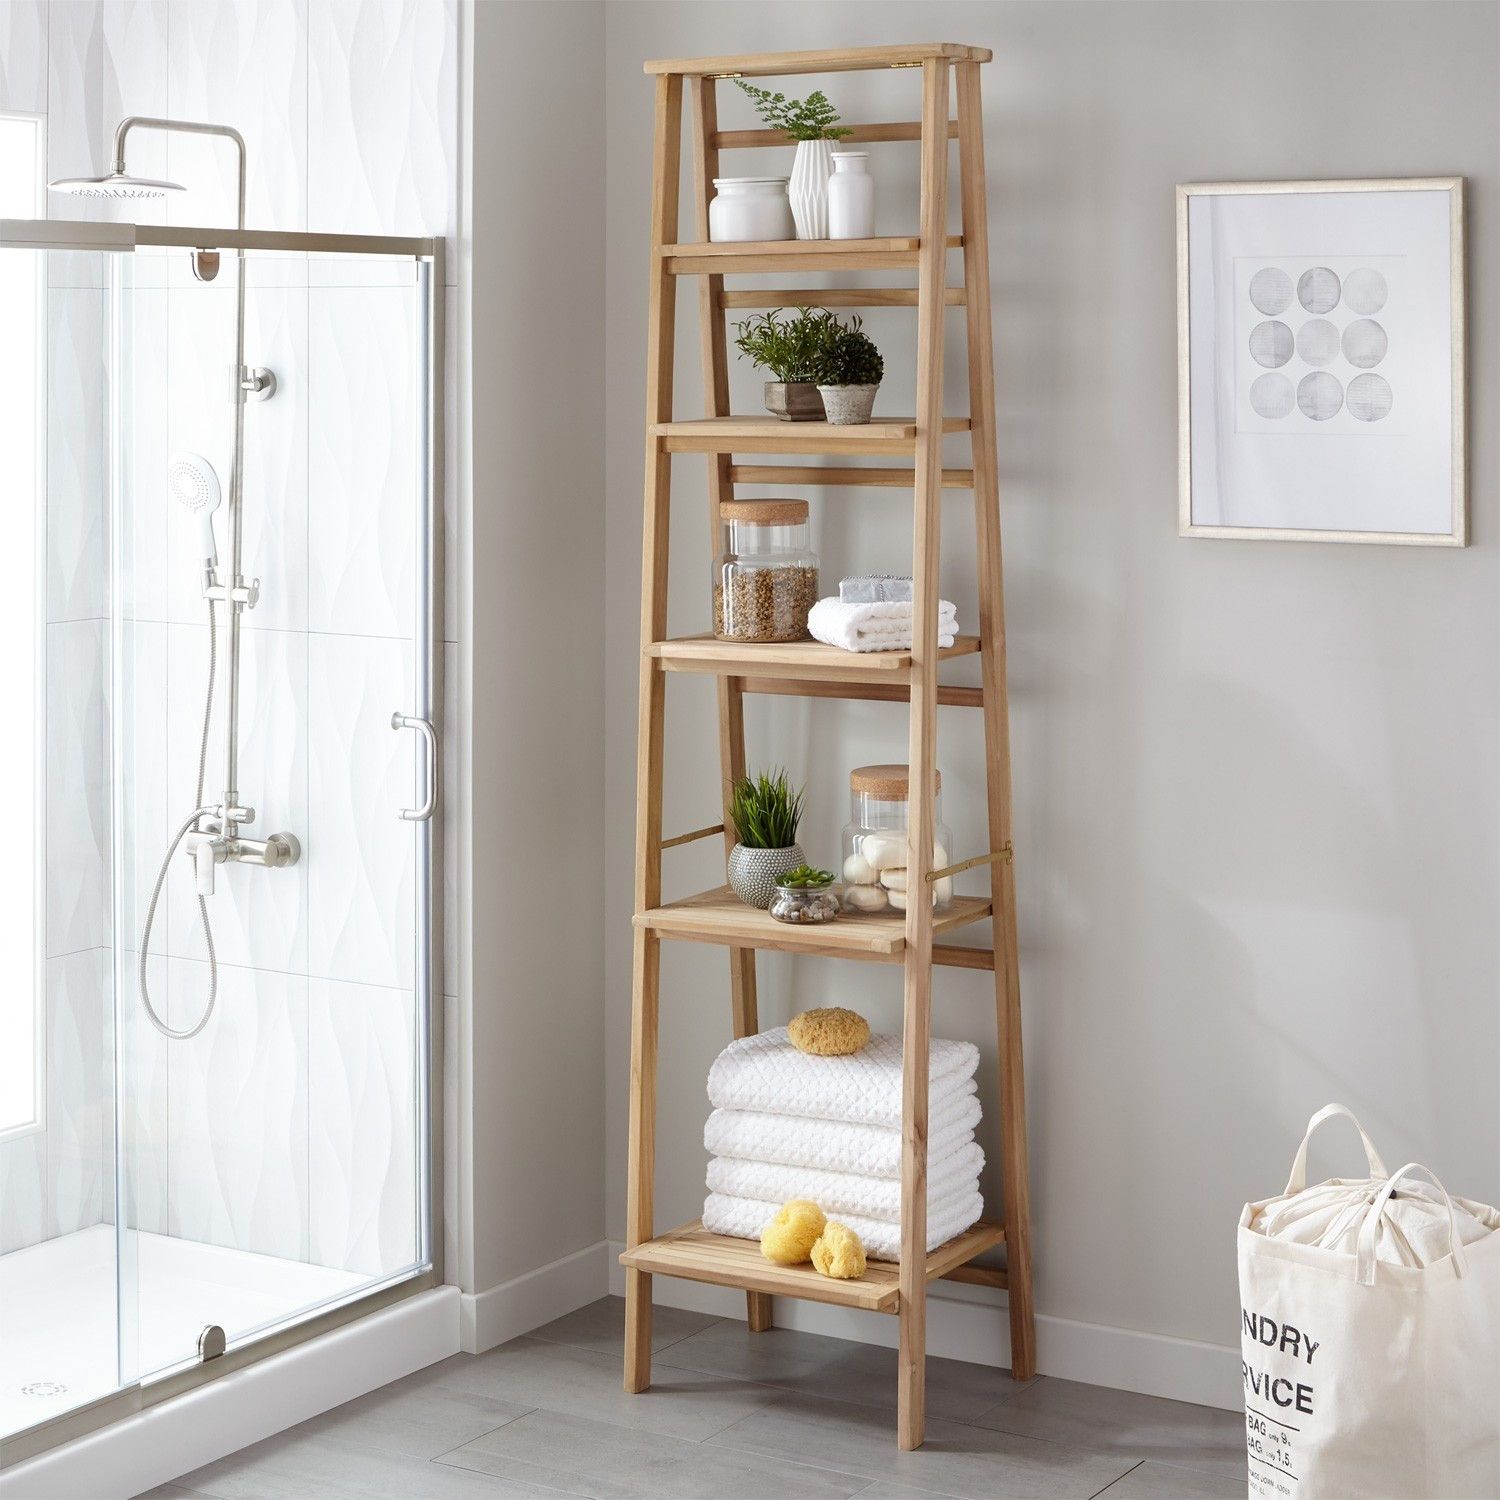 Ladder Style Shelf for a Simple Look